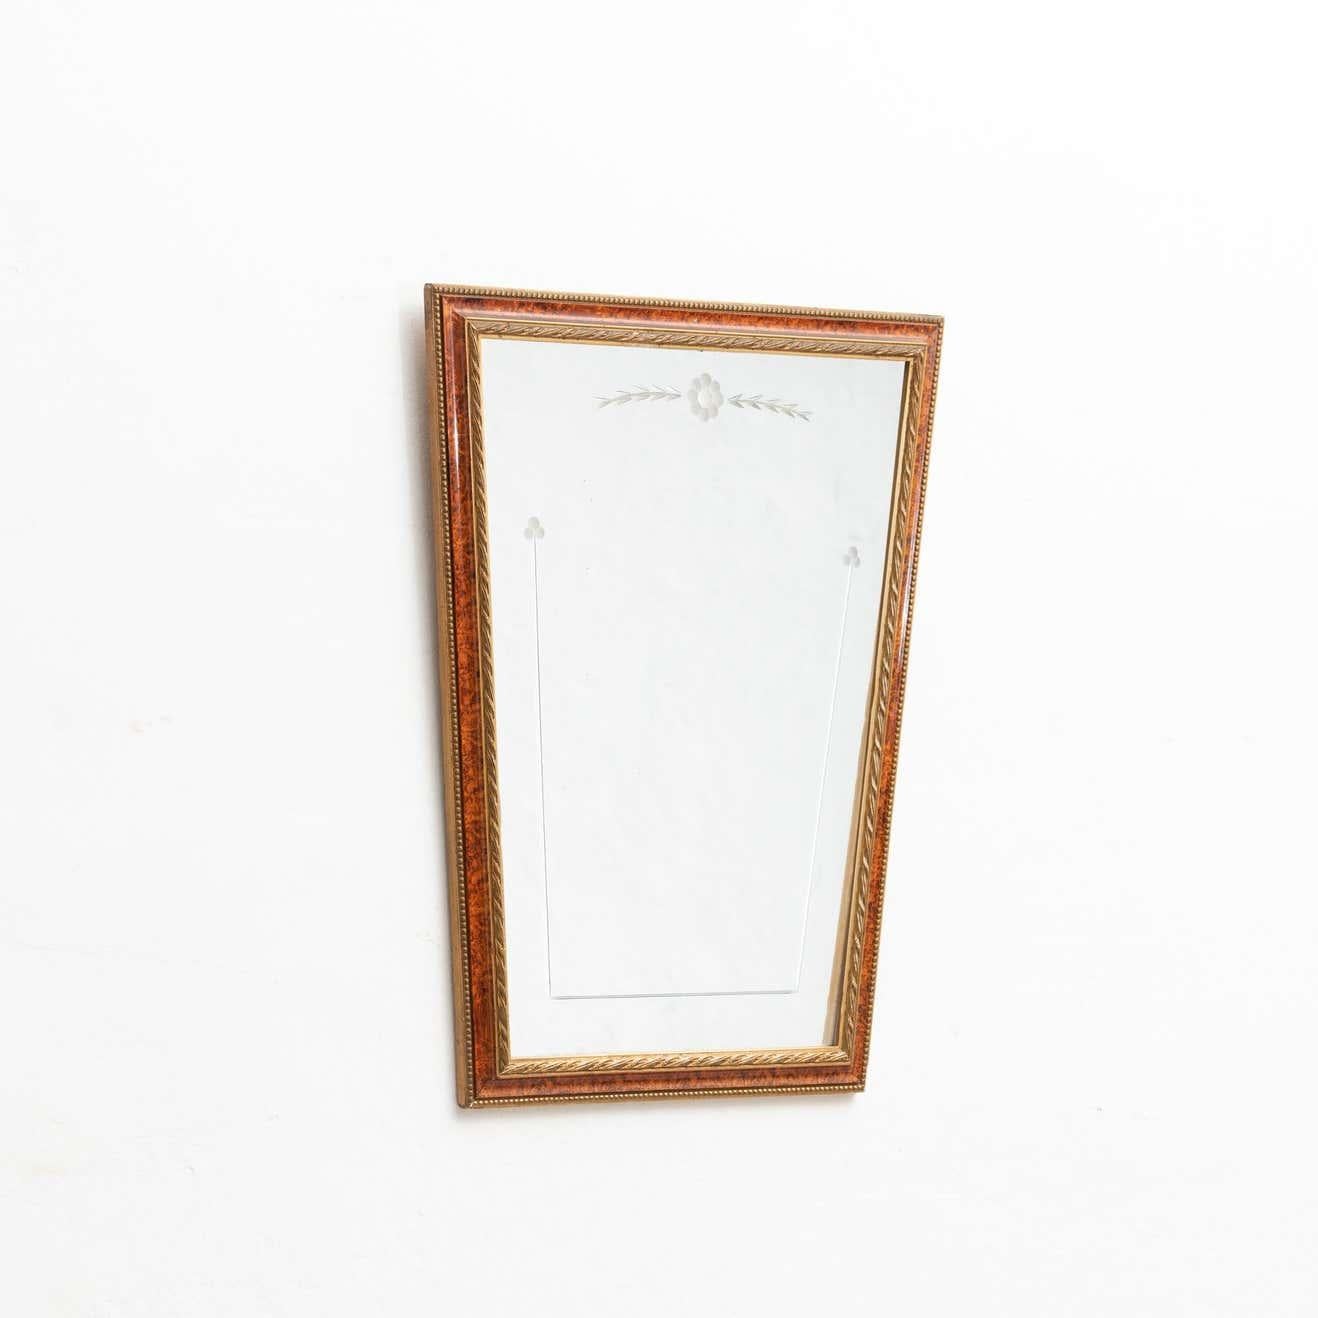 Spanish Mid-Century Modern Handcrafted Wood Mirror, circa 1950 In Good Condition For Sale In Barcelona, Barcelona